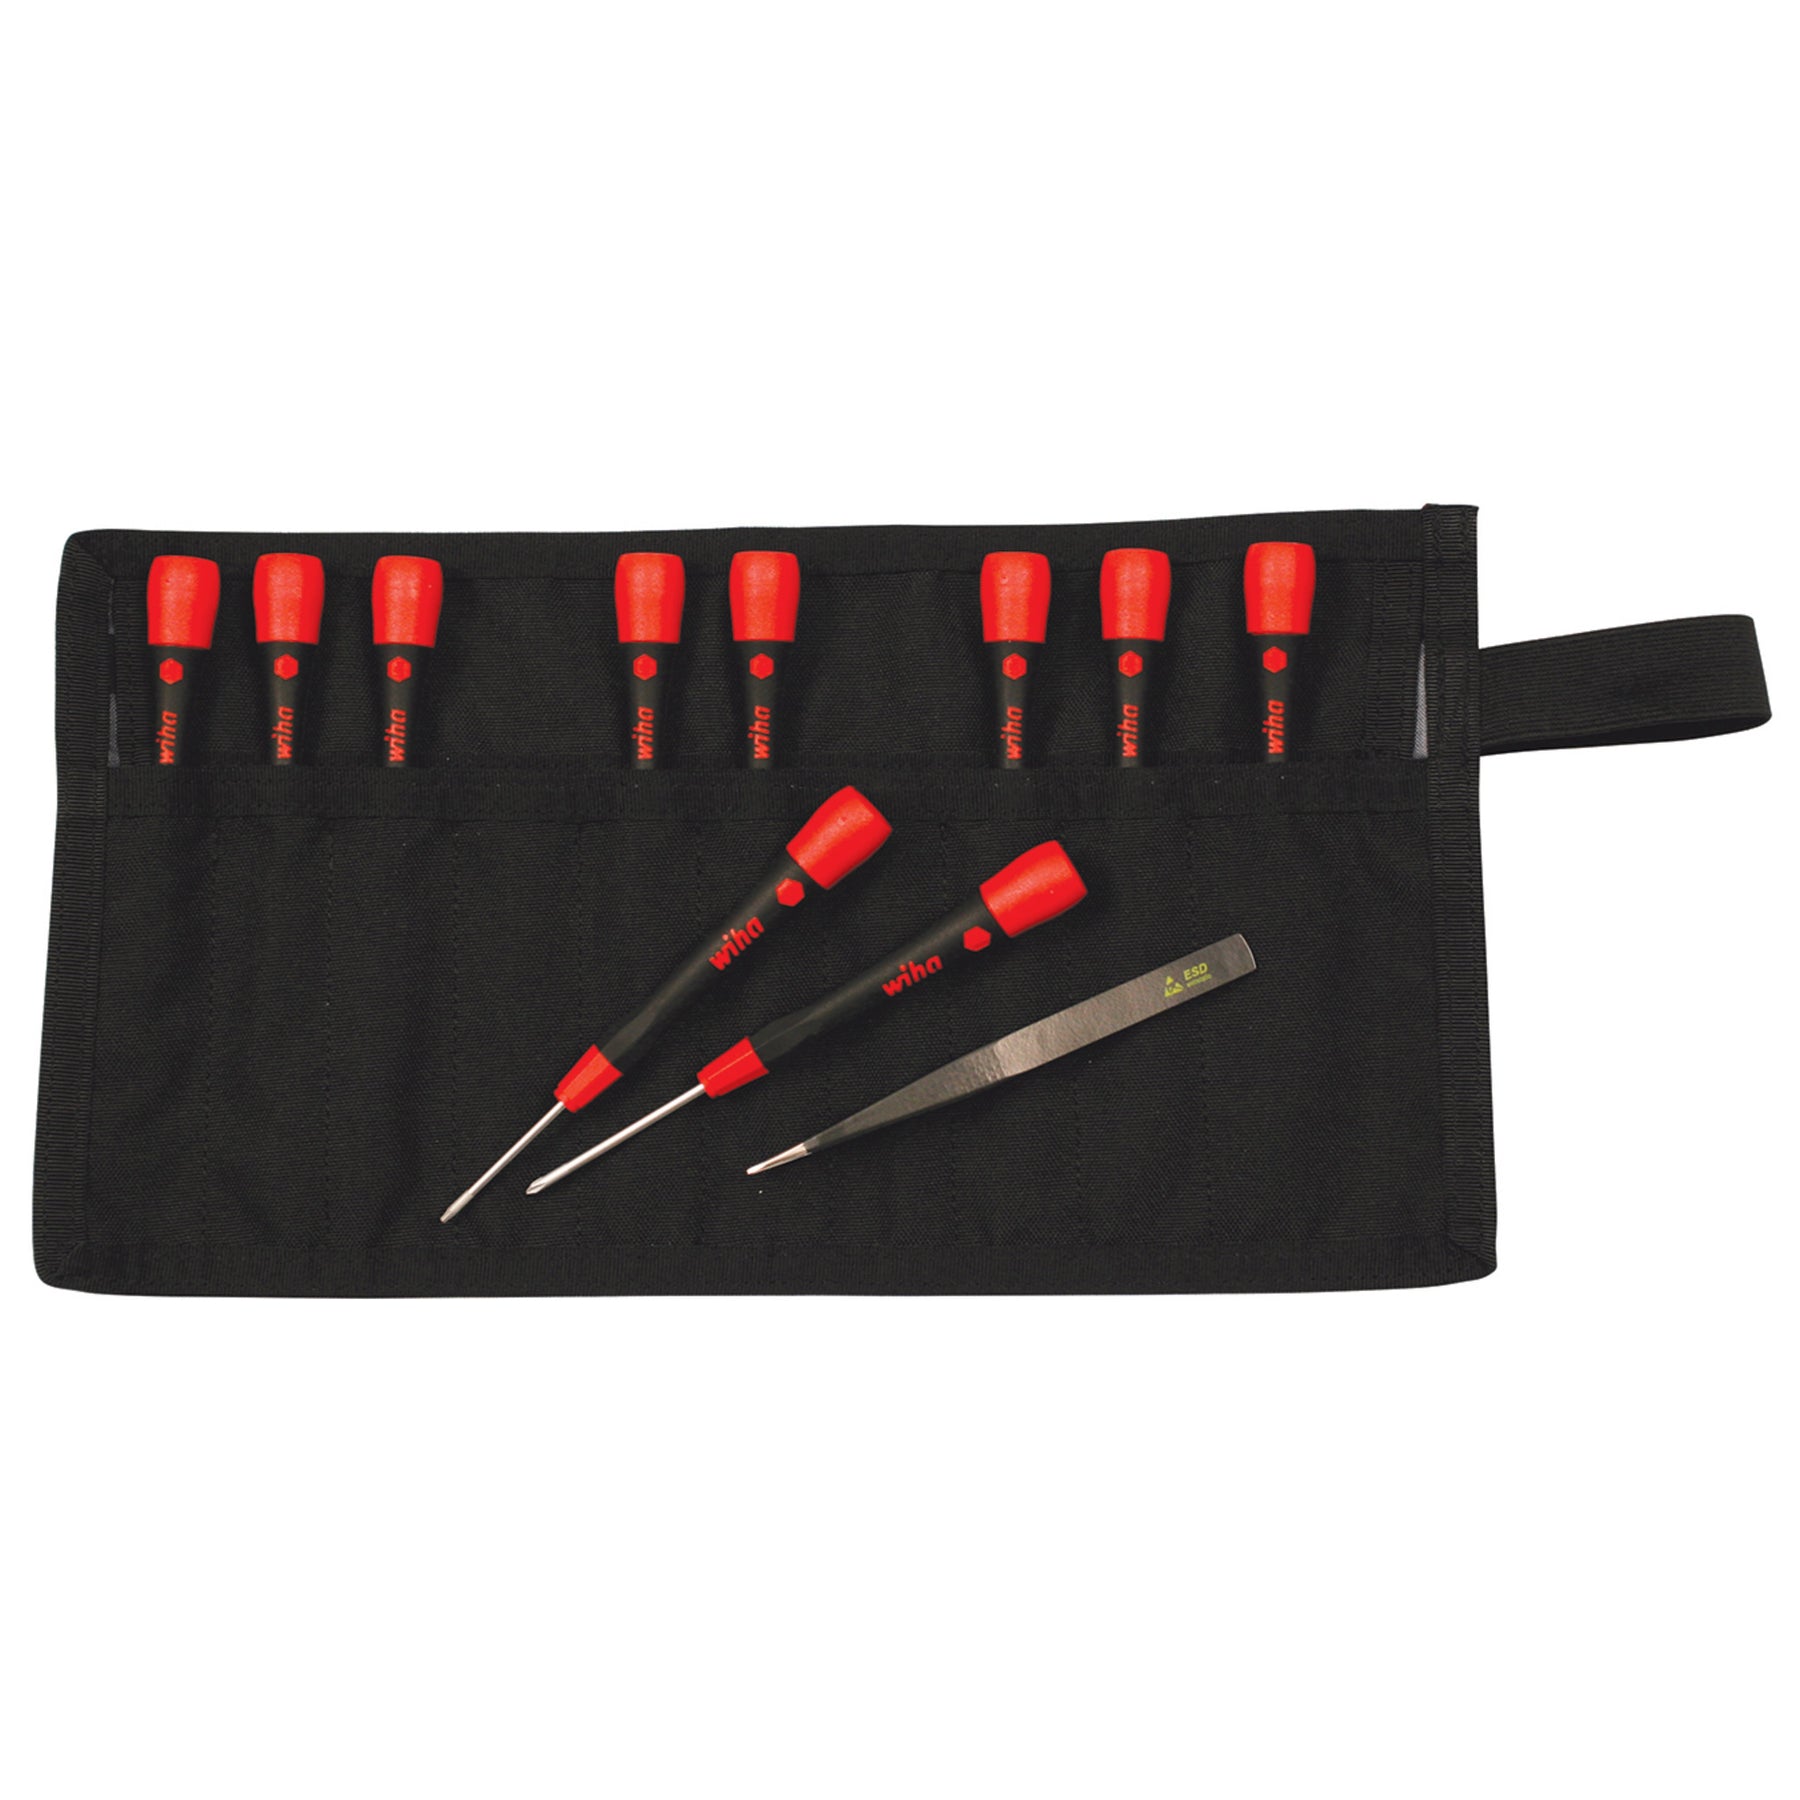 11 Piece PicoFinish Precision Screwdriver and Tweezers Smartphone Technician Set with Roll Pouch